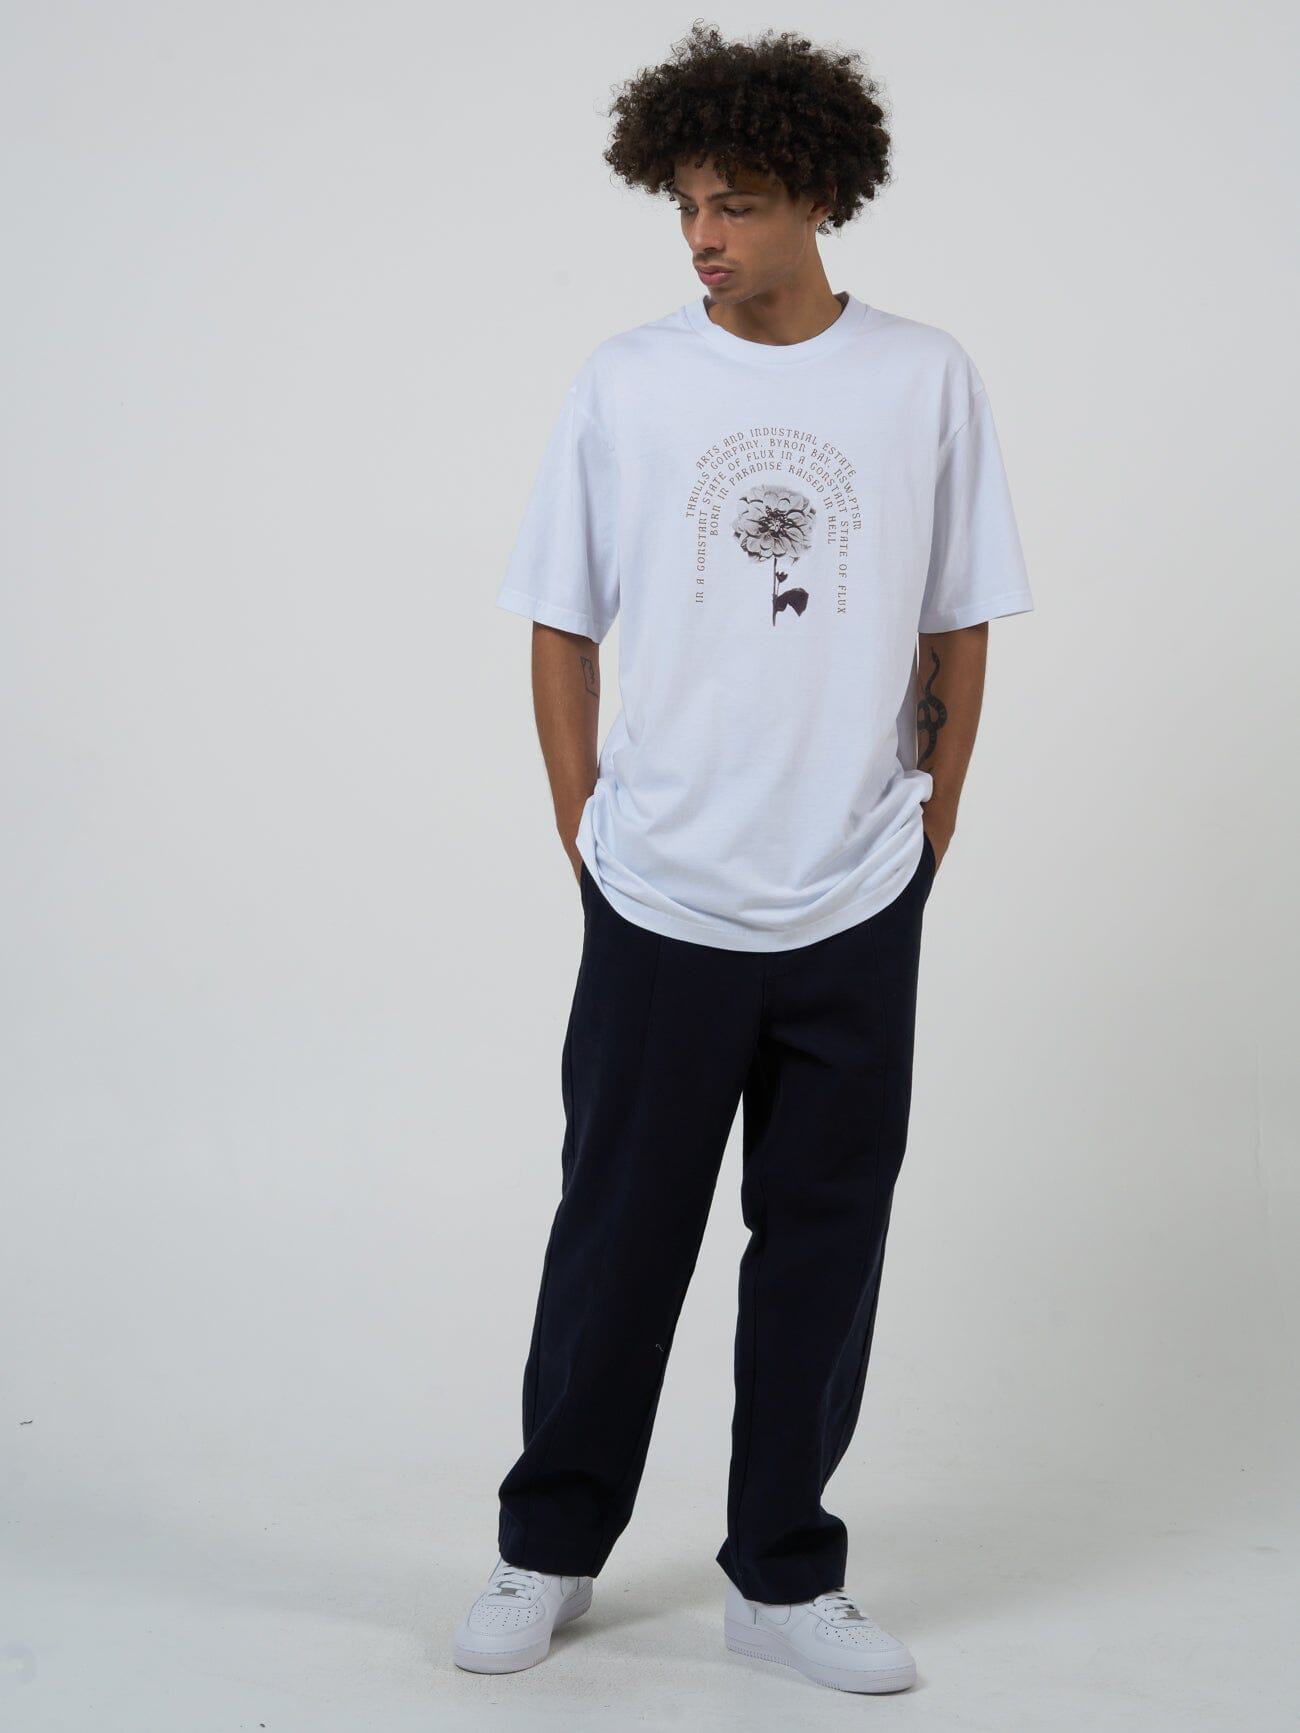 Flux Arc Oversize Fit Tee - White